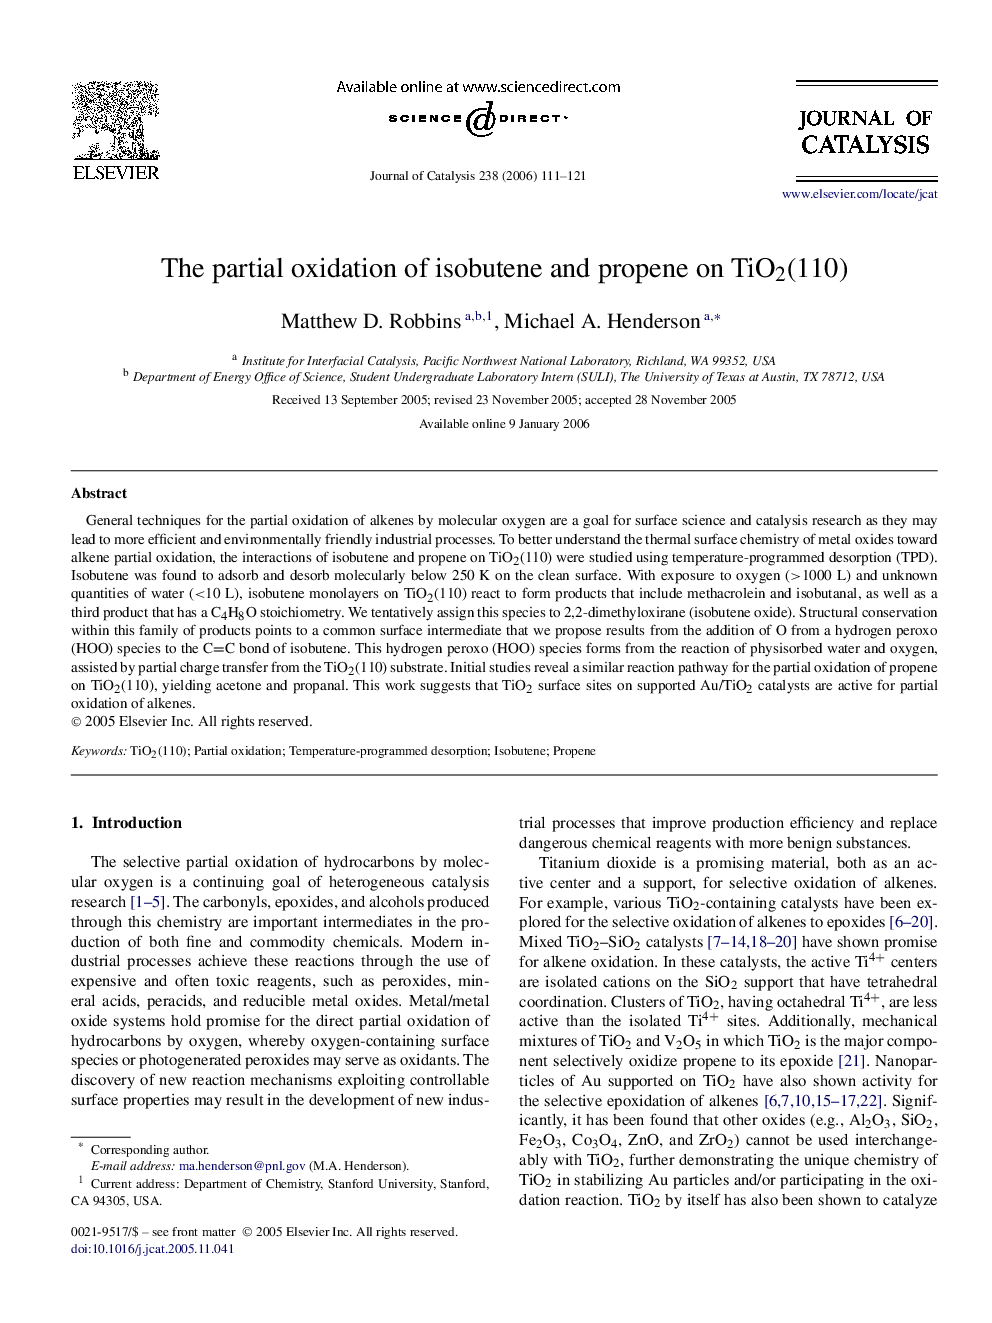 The partial oxidation of isobutene and propene on TiO2(110)